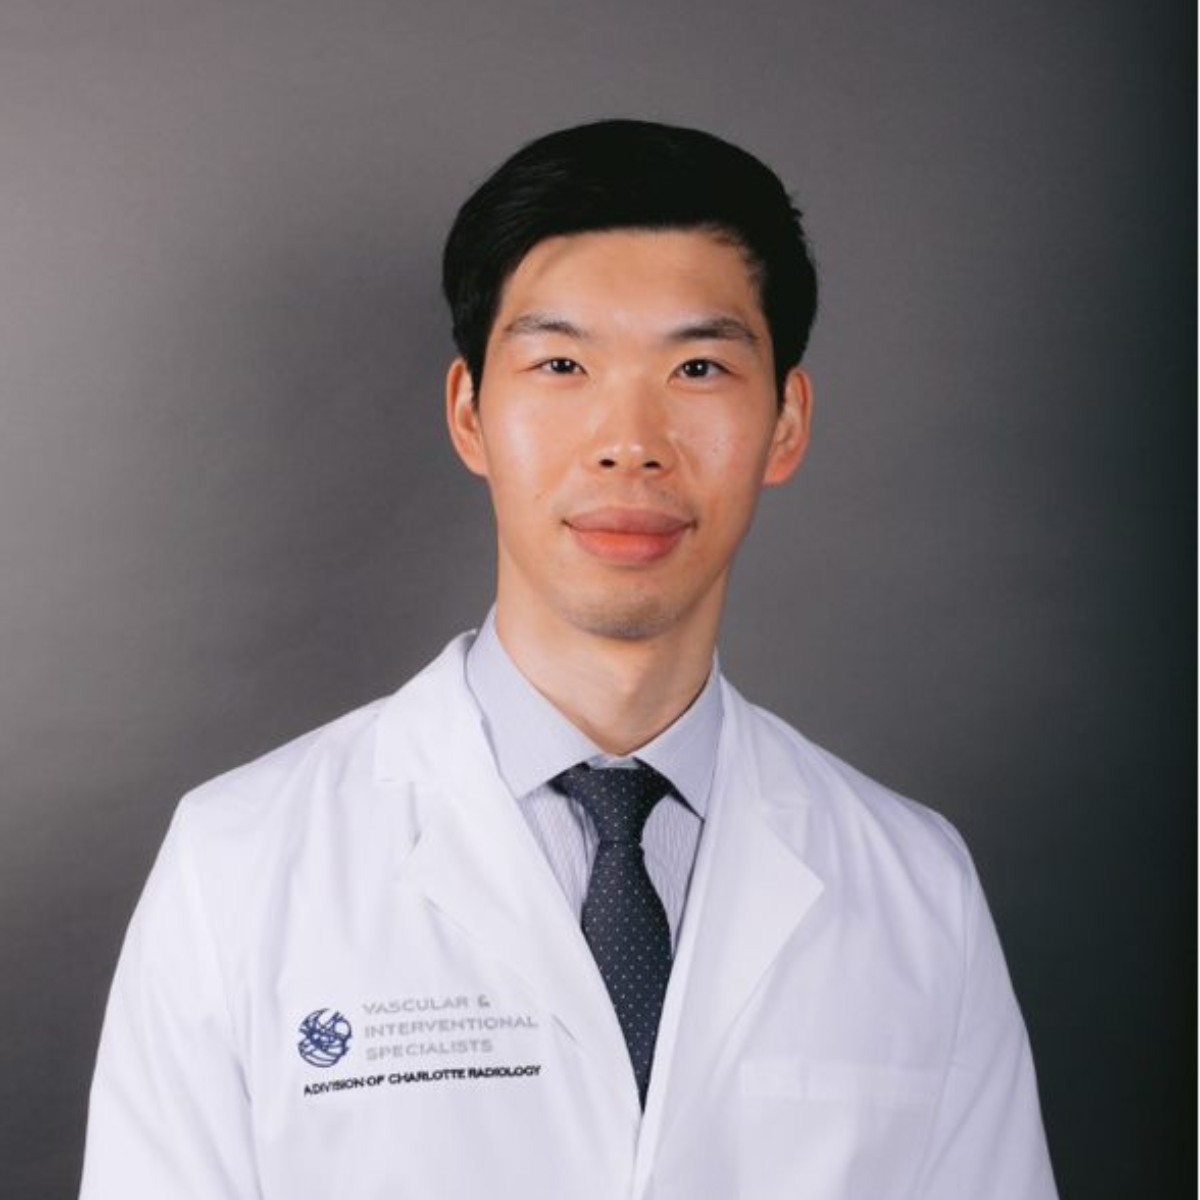 Uterine Fibroid Myths Debunked by James Chen, MD - Charlotte Radiology